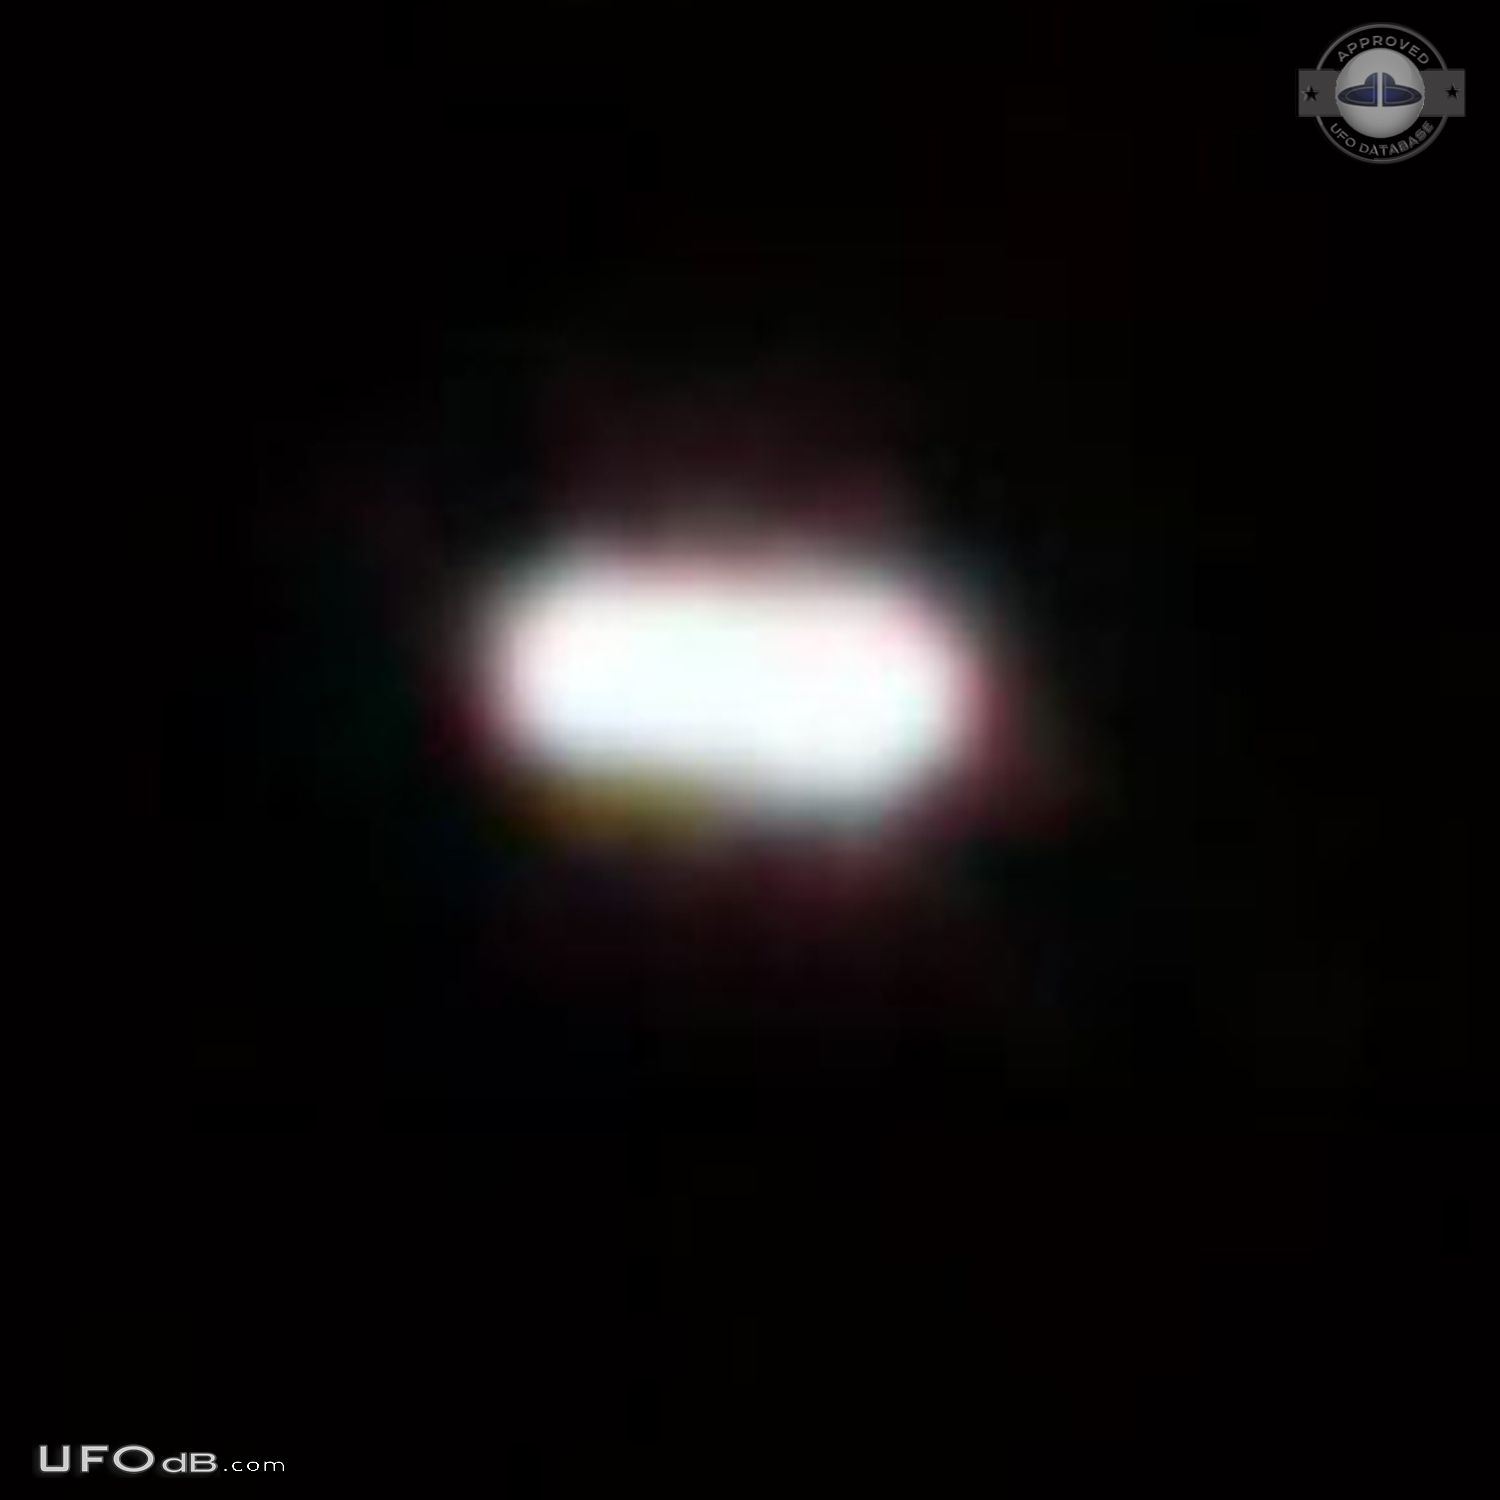 Oval UFO like a star but it disappeared - Bergen New York USA 2015 UFO Picture #731-4